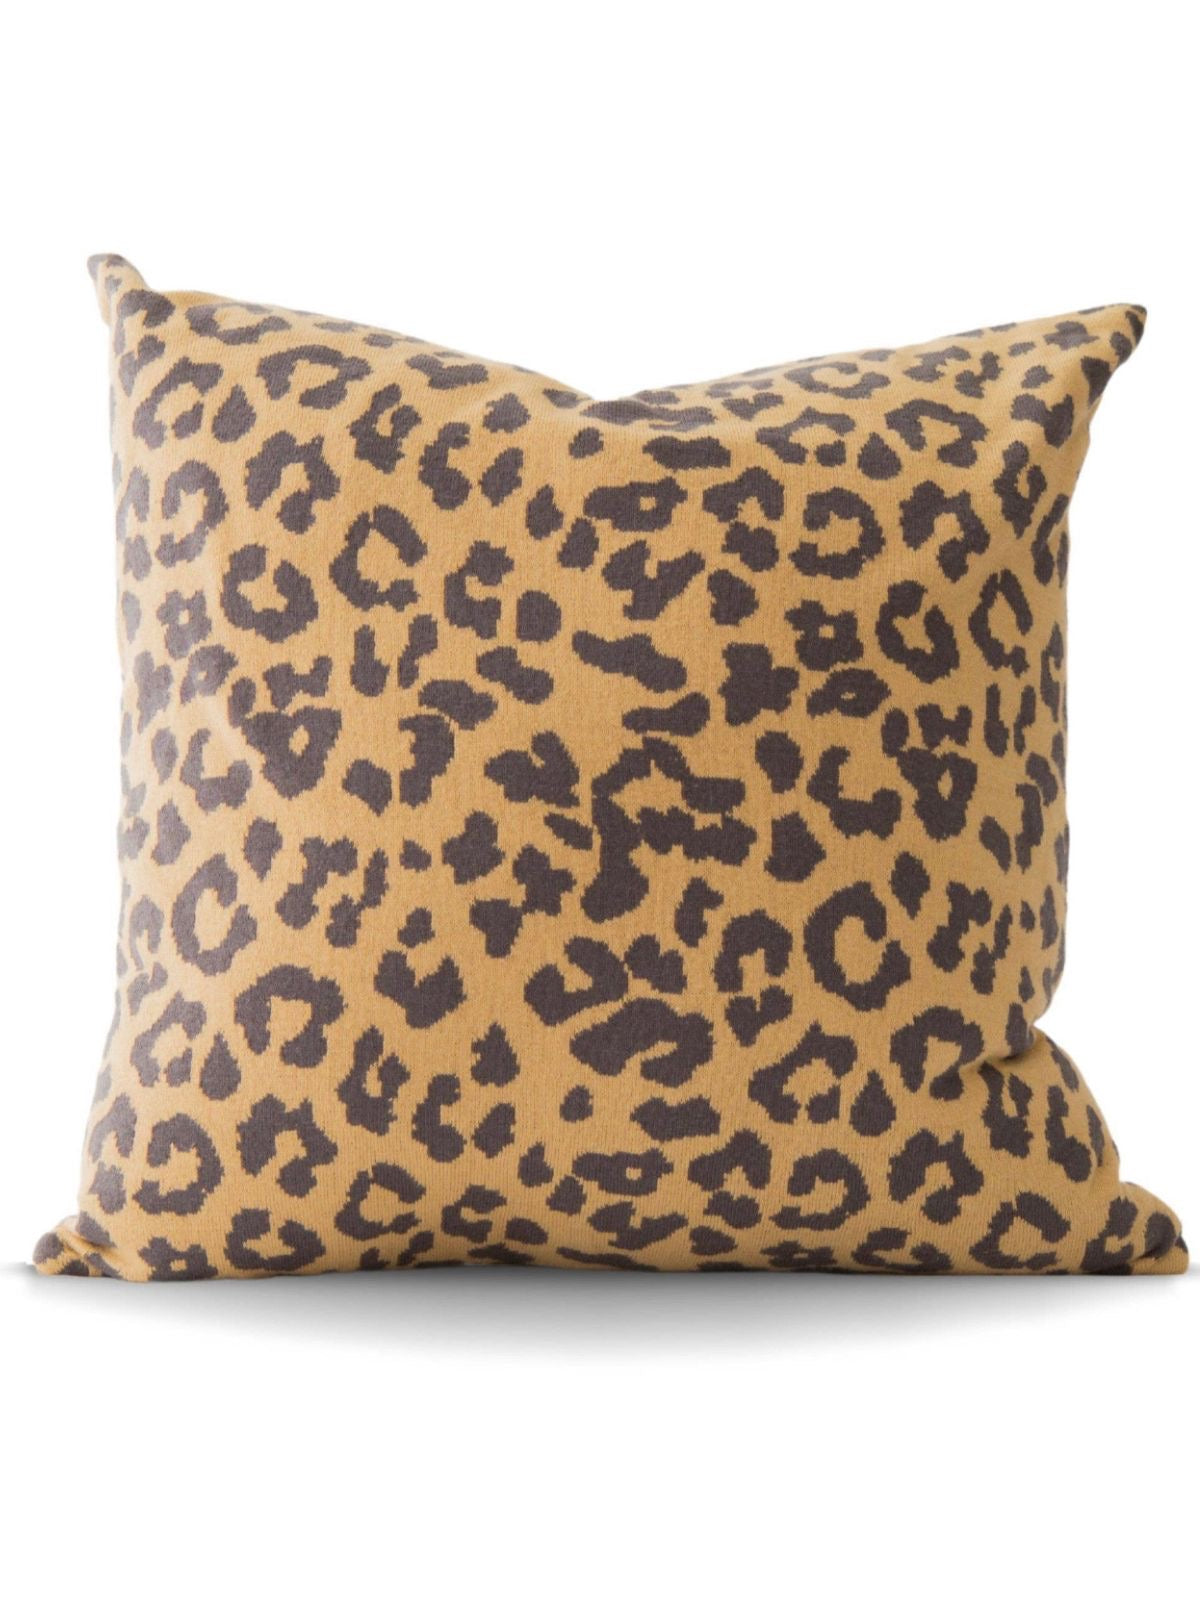 The luxurious soft feel of this 20x20 Leona Leopard 100% cotton knit pillow has a weighty stretch, making it one of your favorites. It is yarn-dyed for a lasting rich color. Sold by KYA Home Decor